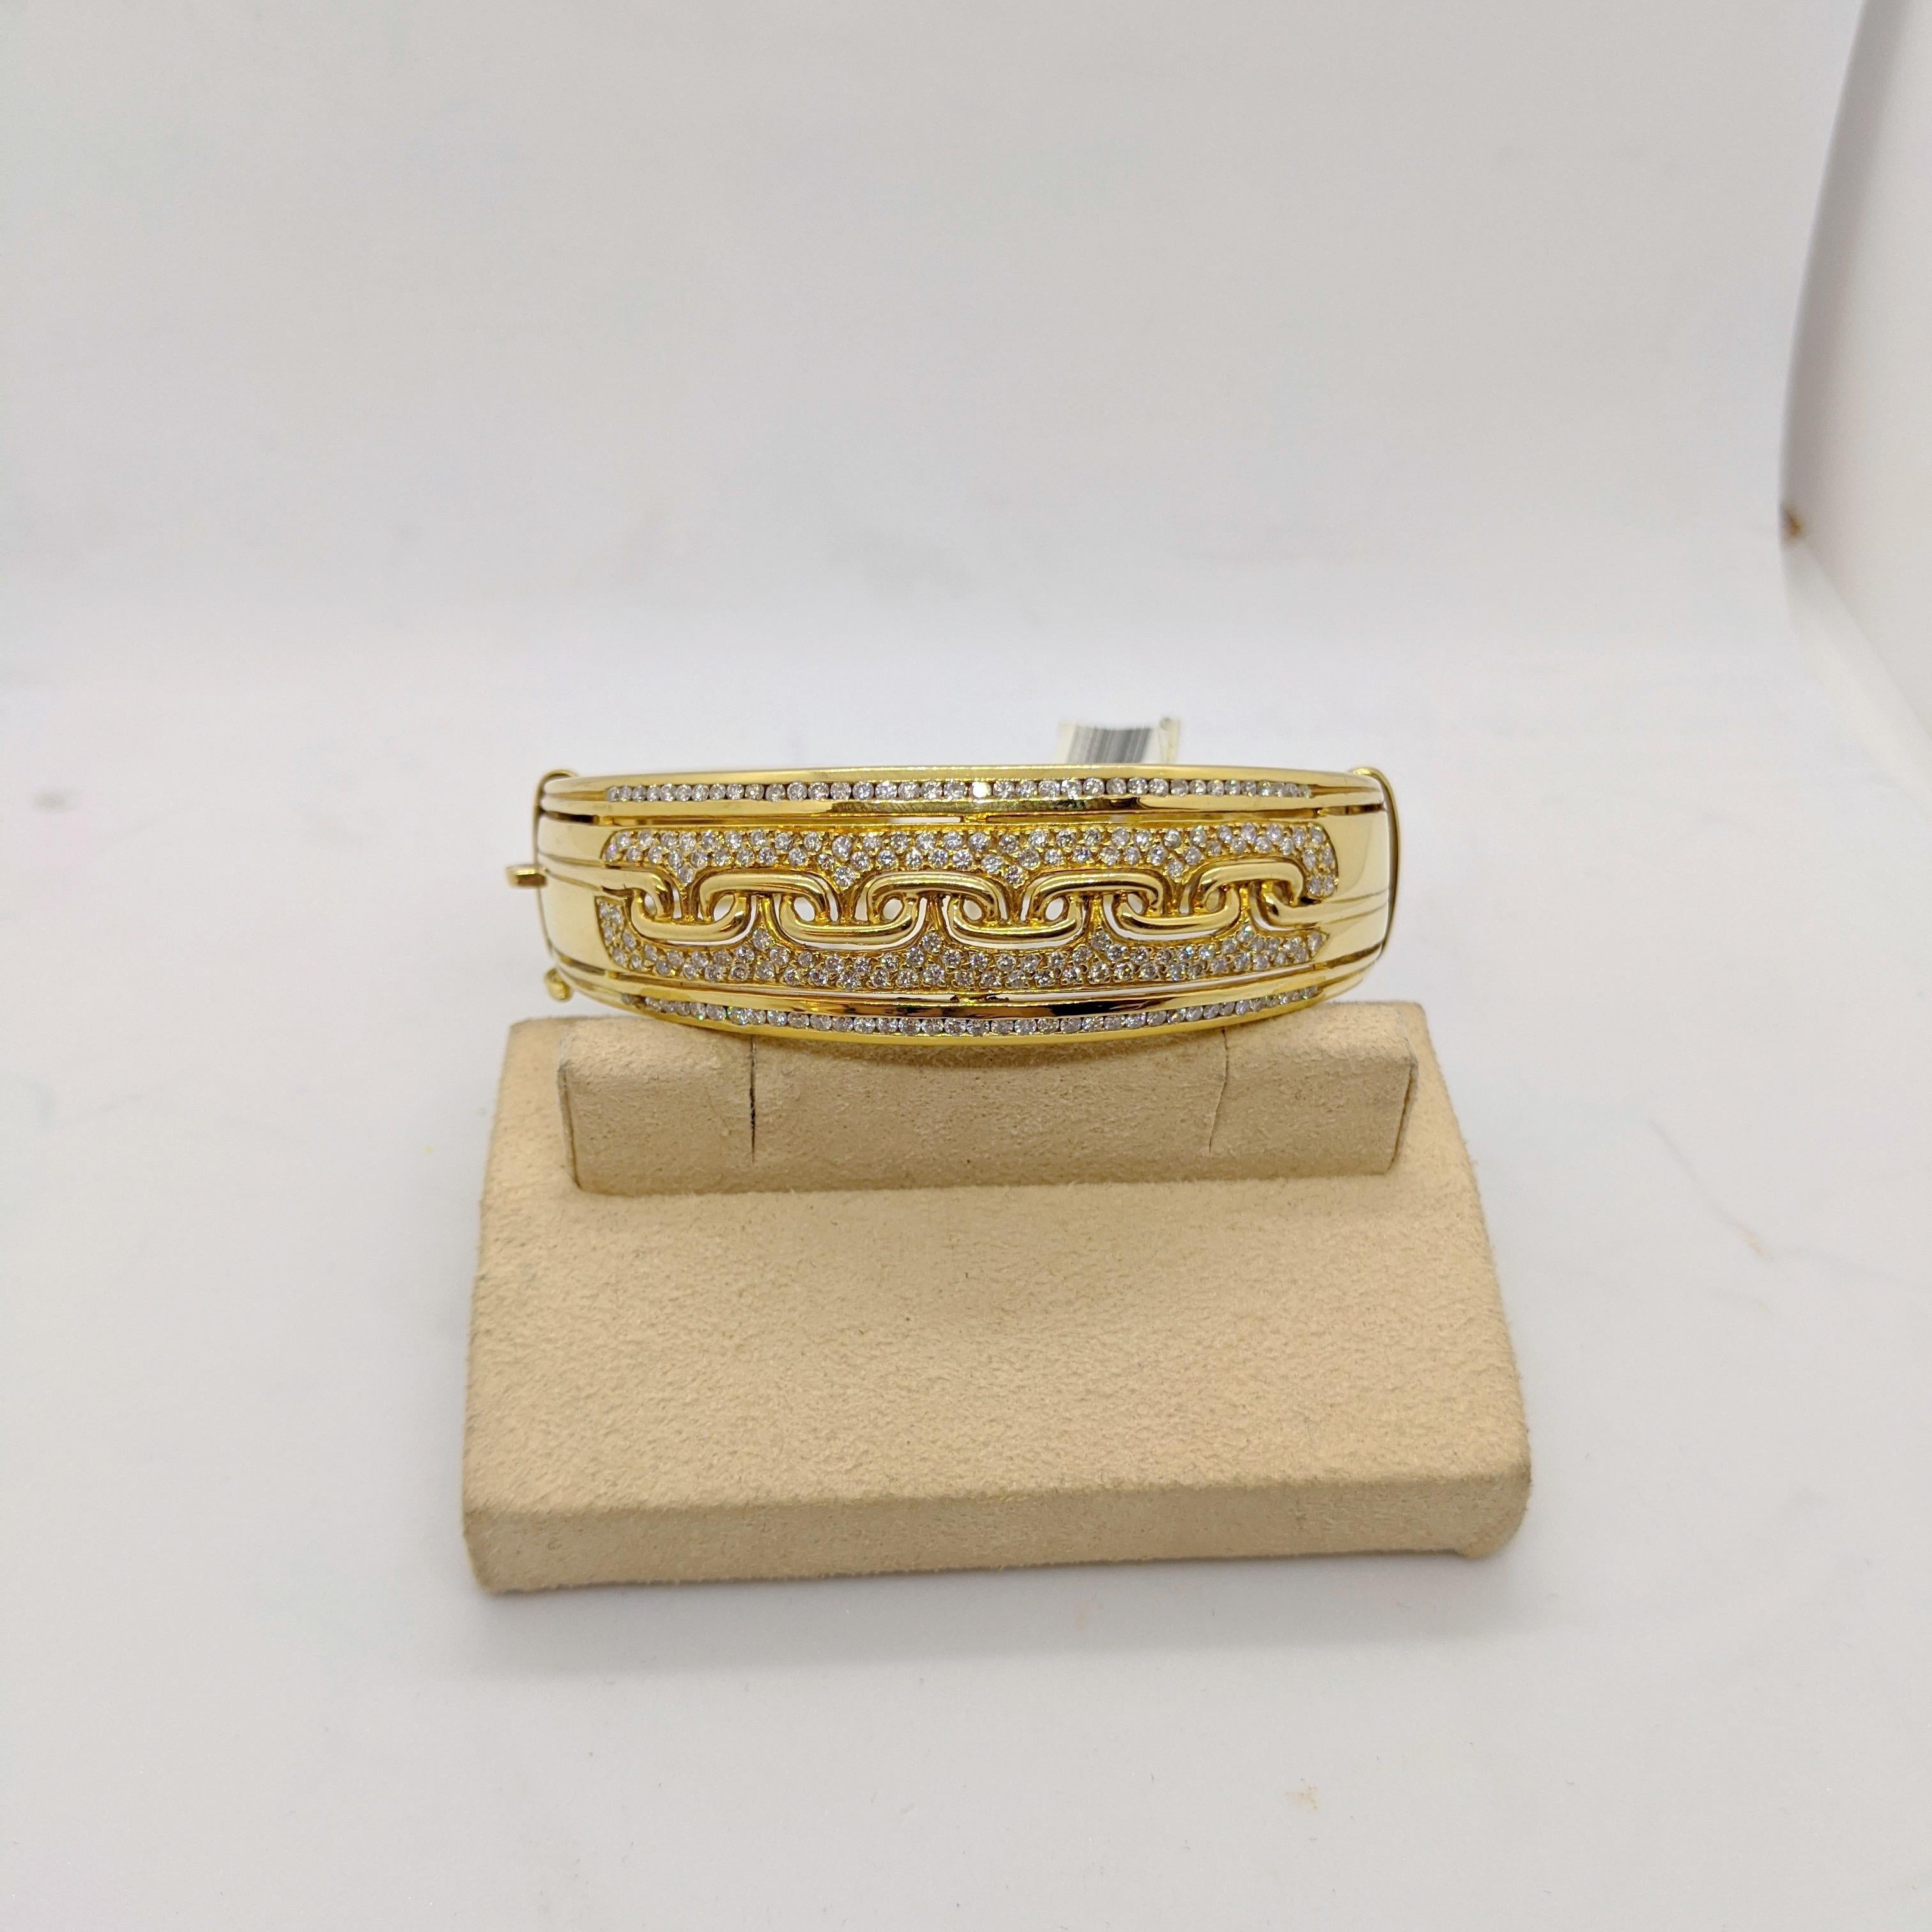 This bracelet is designed in 18 karat yellow gold . It is a wide cuff/bangle. The center of the bracelet is set with  3.32 carats of round brilliants diamonds. A gold link pattern is set across the center. There is a hinge on one side and a plunger